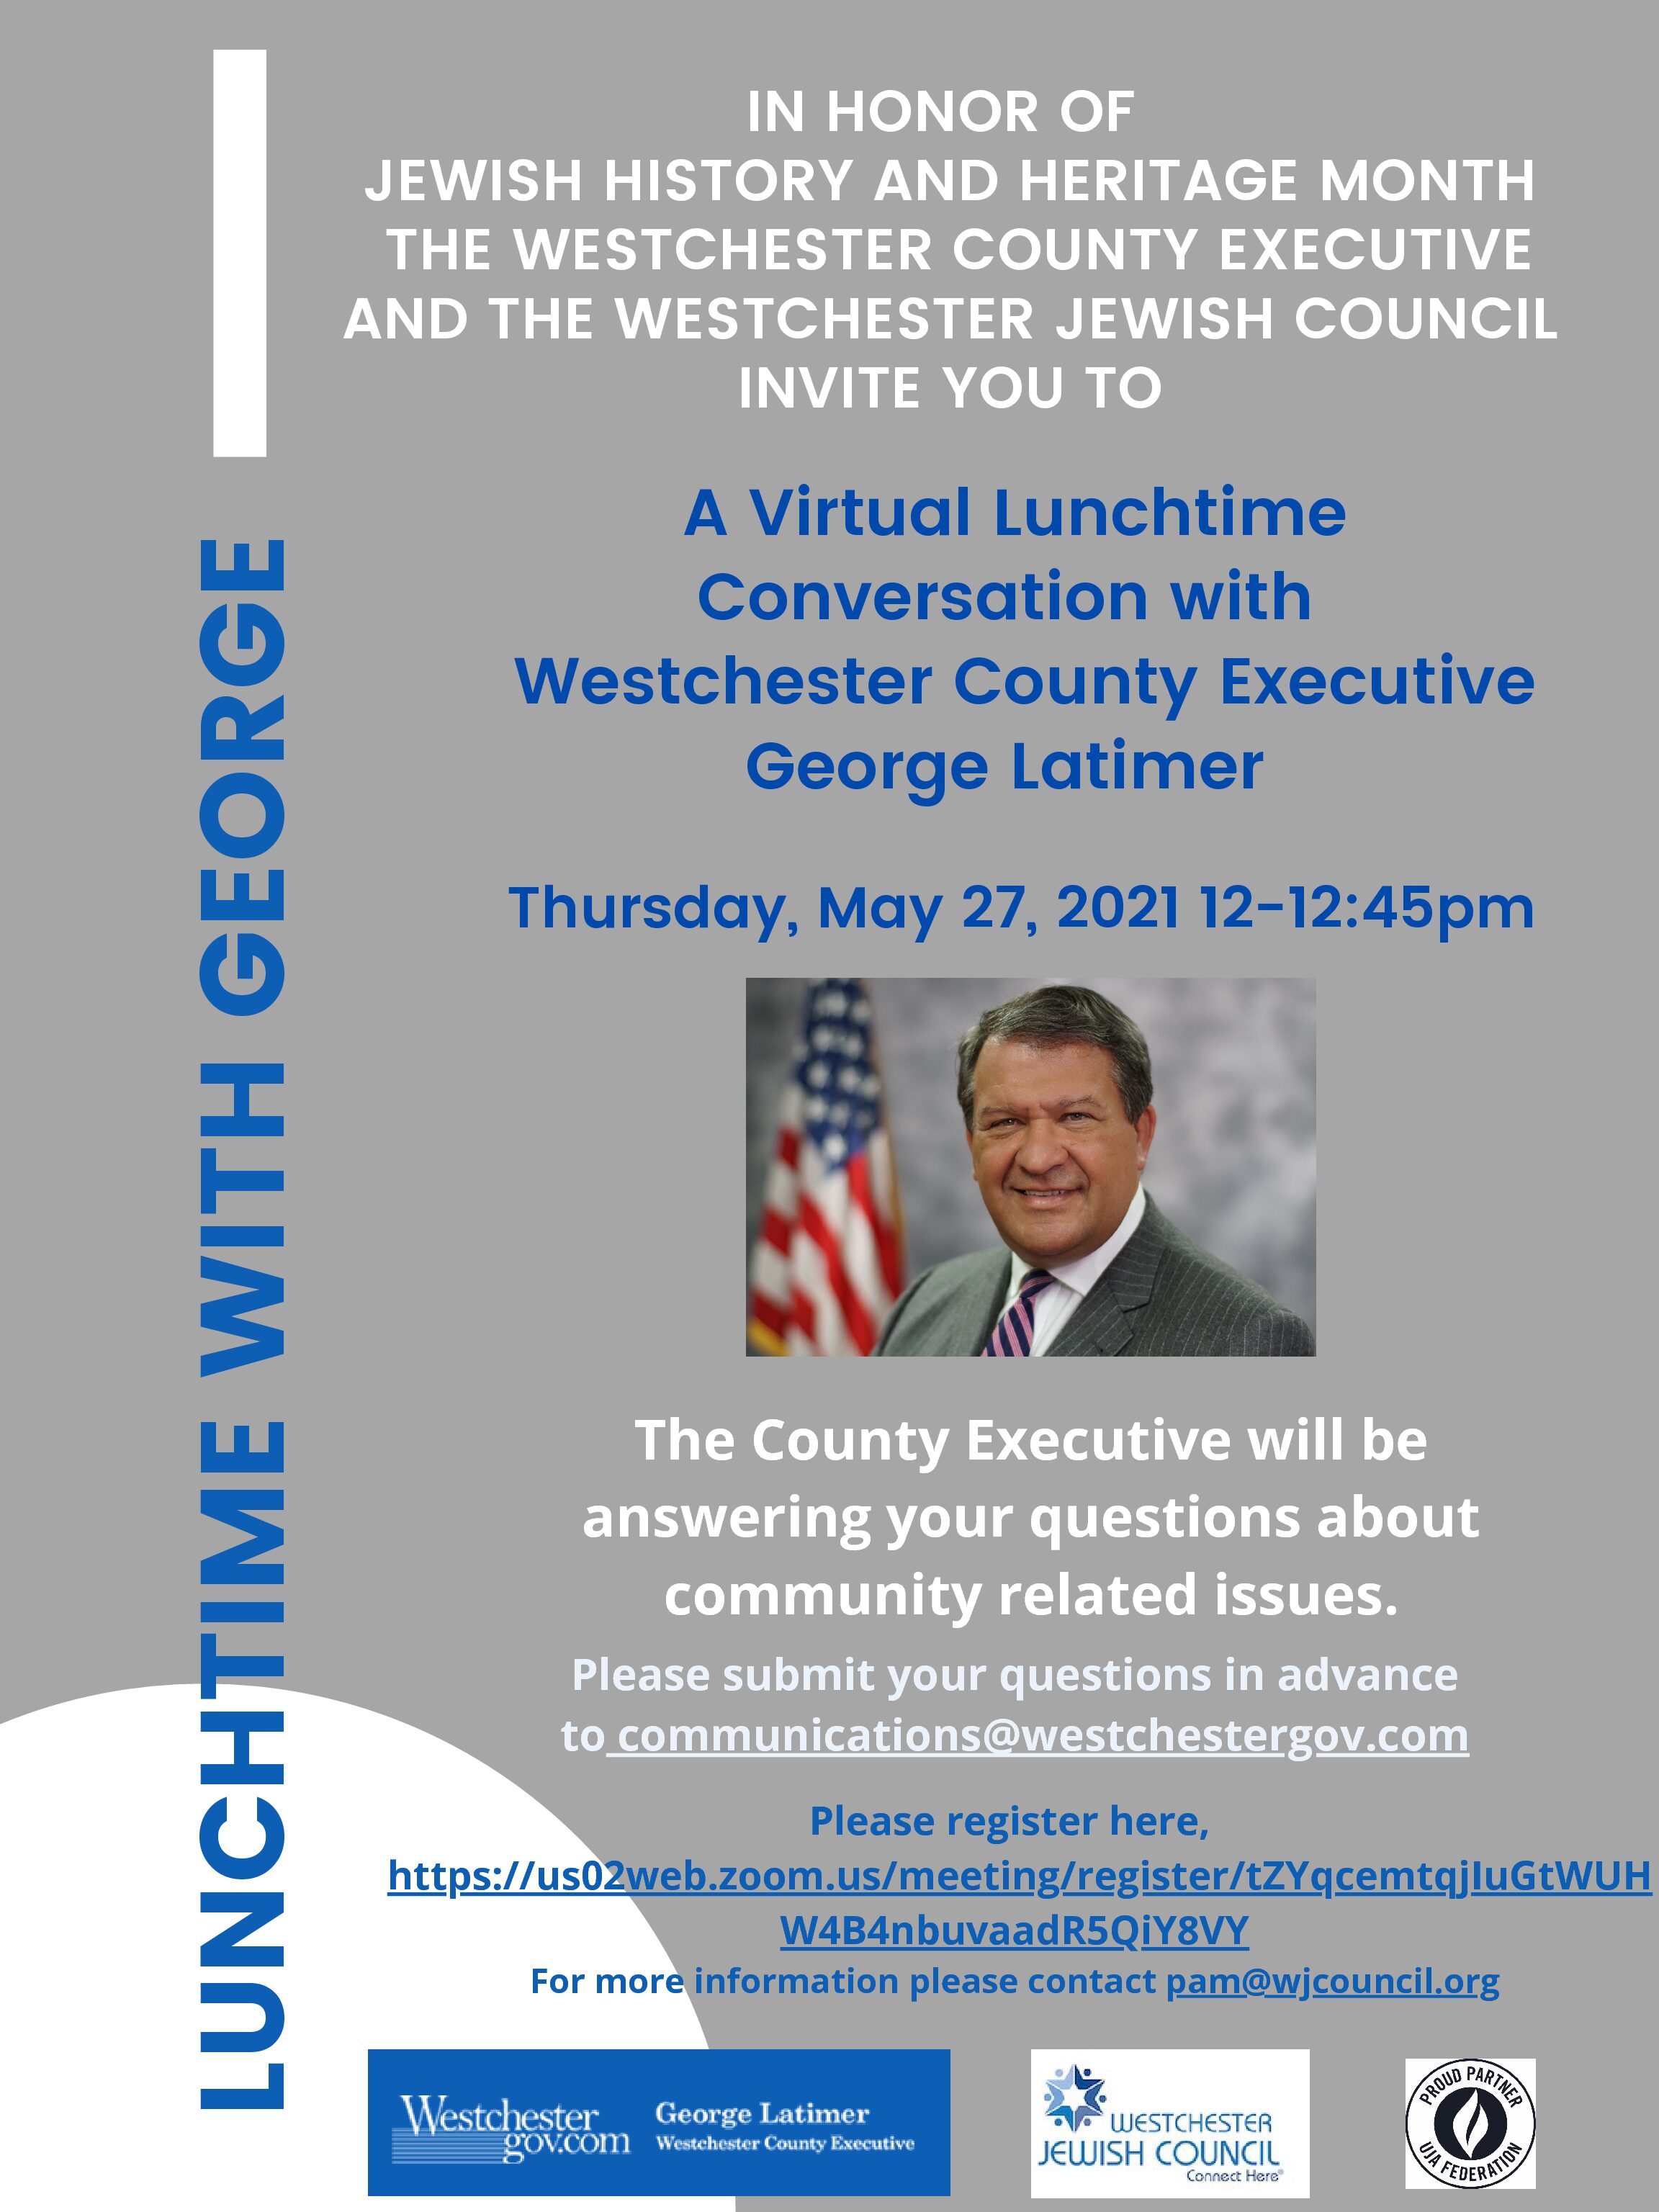 Conversation with County Executive Latimer in Honor of Jewish History and Heritage Month